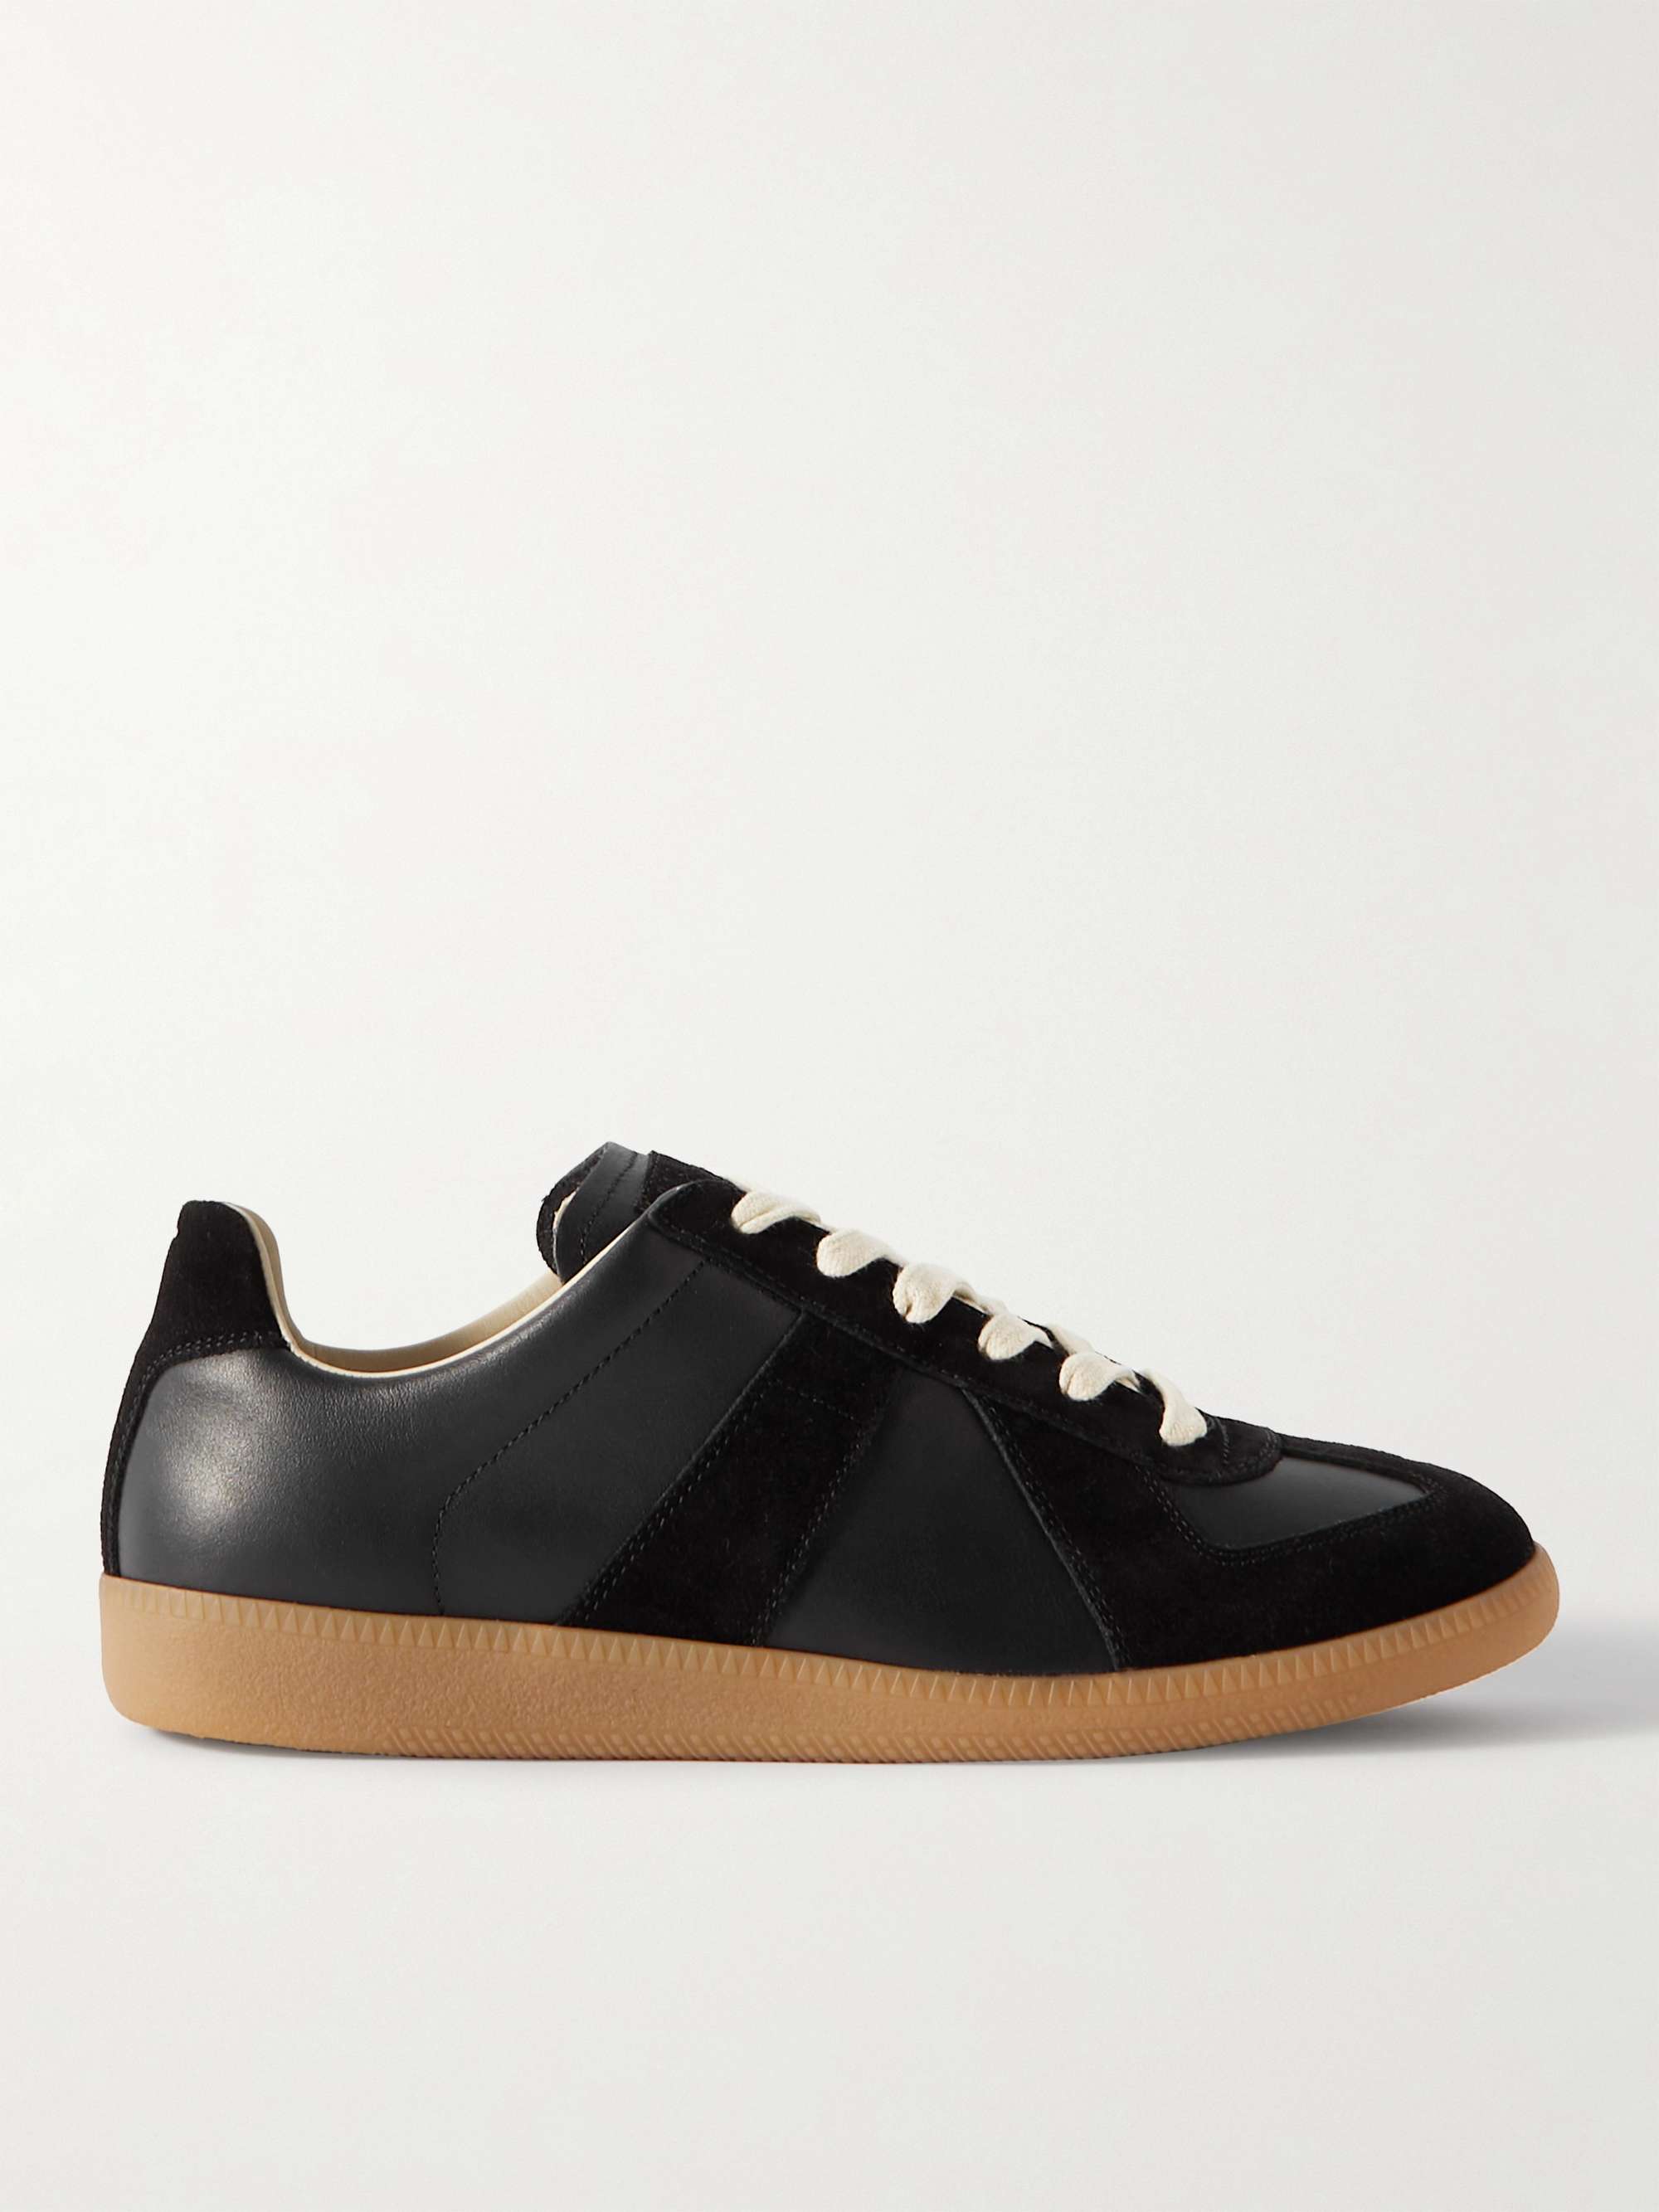 MAISON MARGIELA Replica Leather and Suede Sneakers | MR PORTER